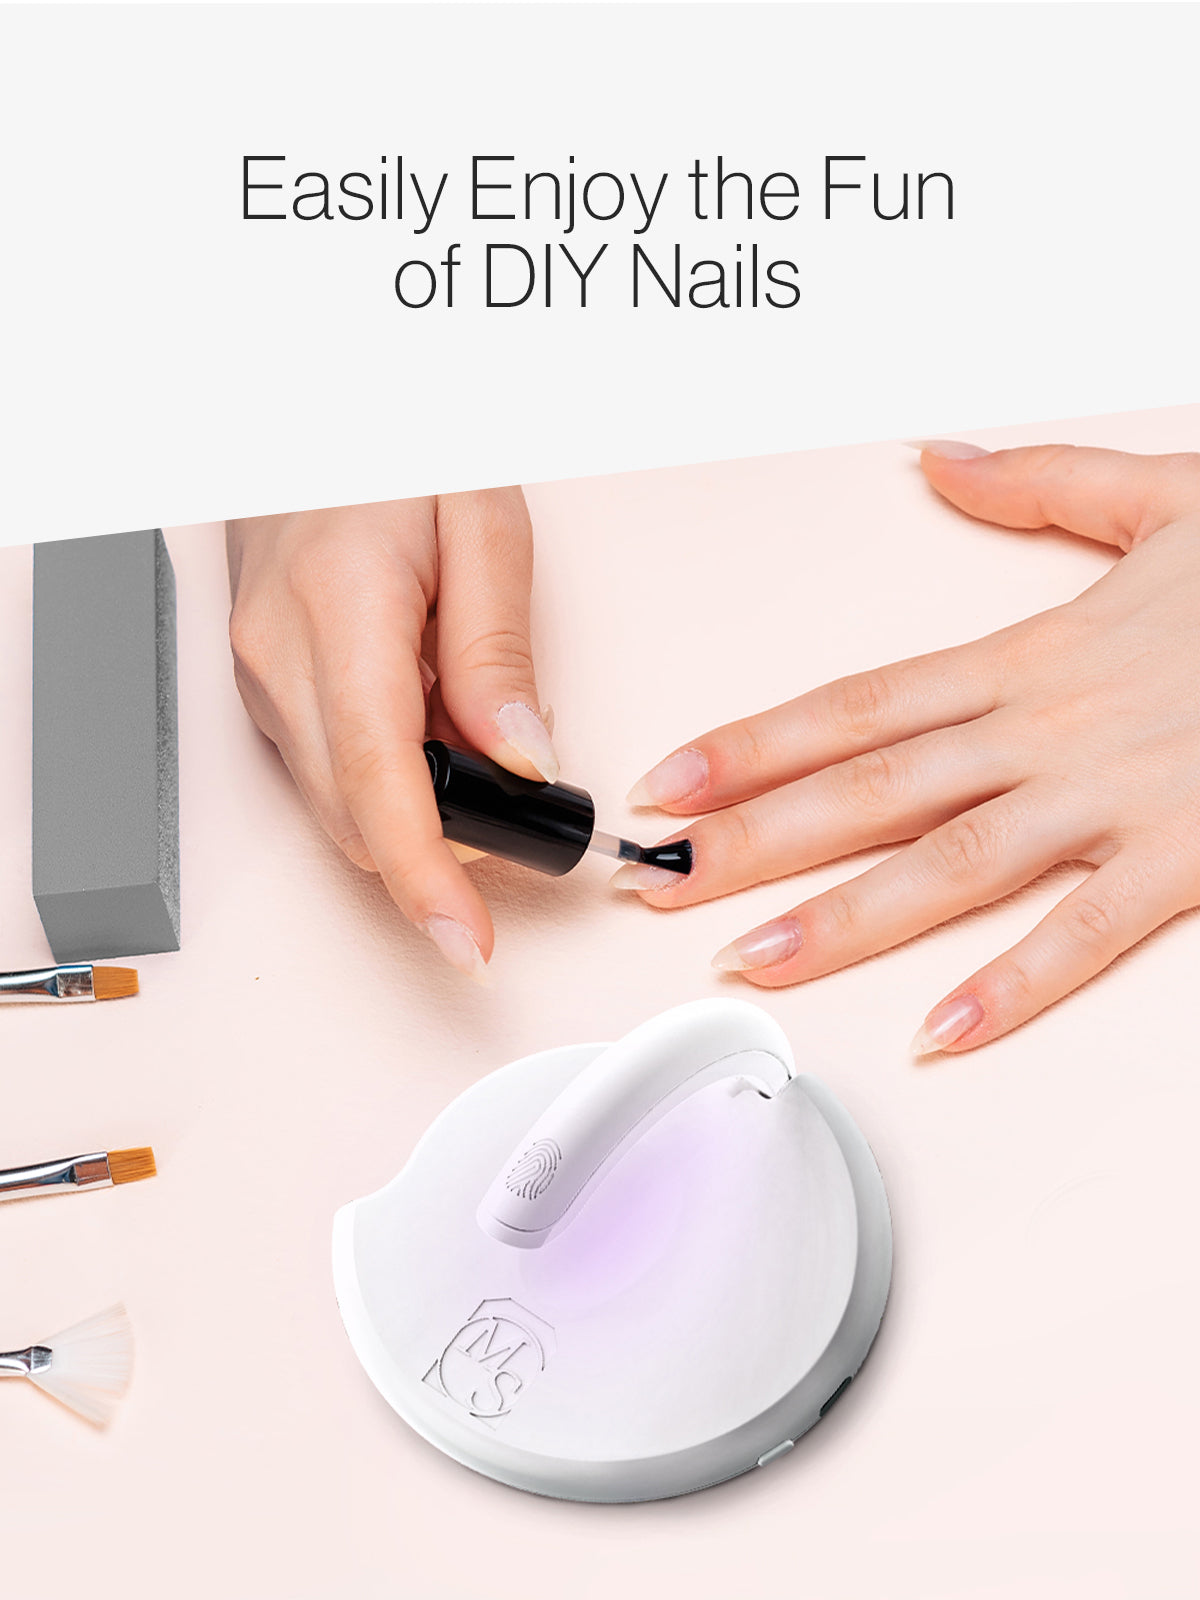 use Rechargeable Mini 2 in 1 LED/UV Nail Art Lamp can enjoy the fun of DIY nails